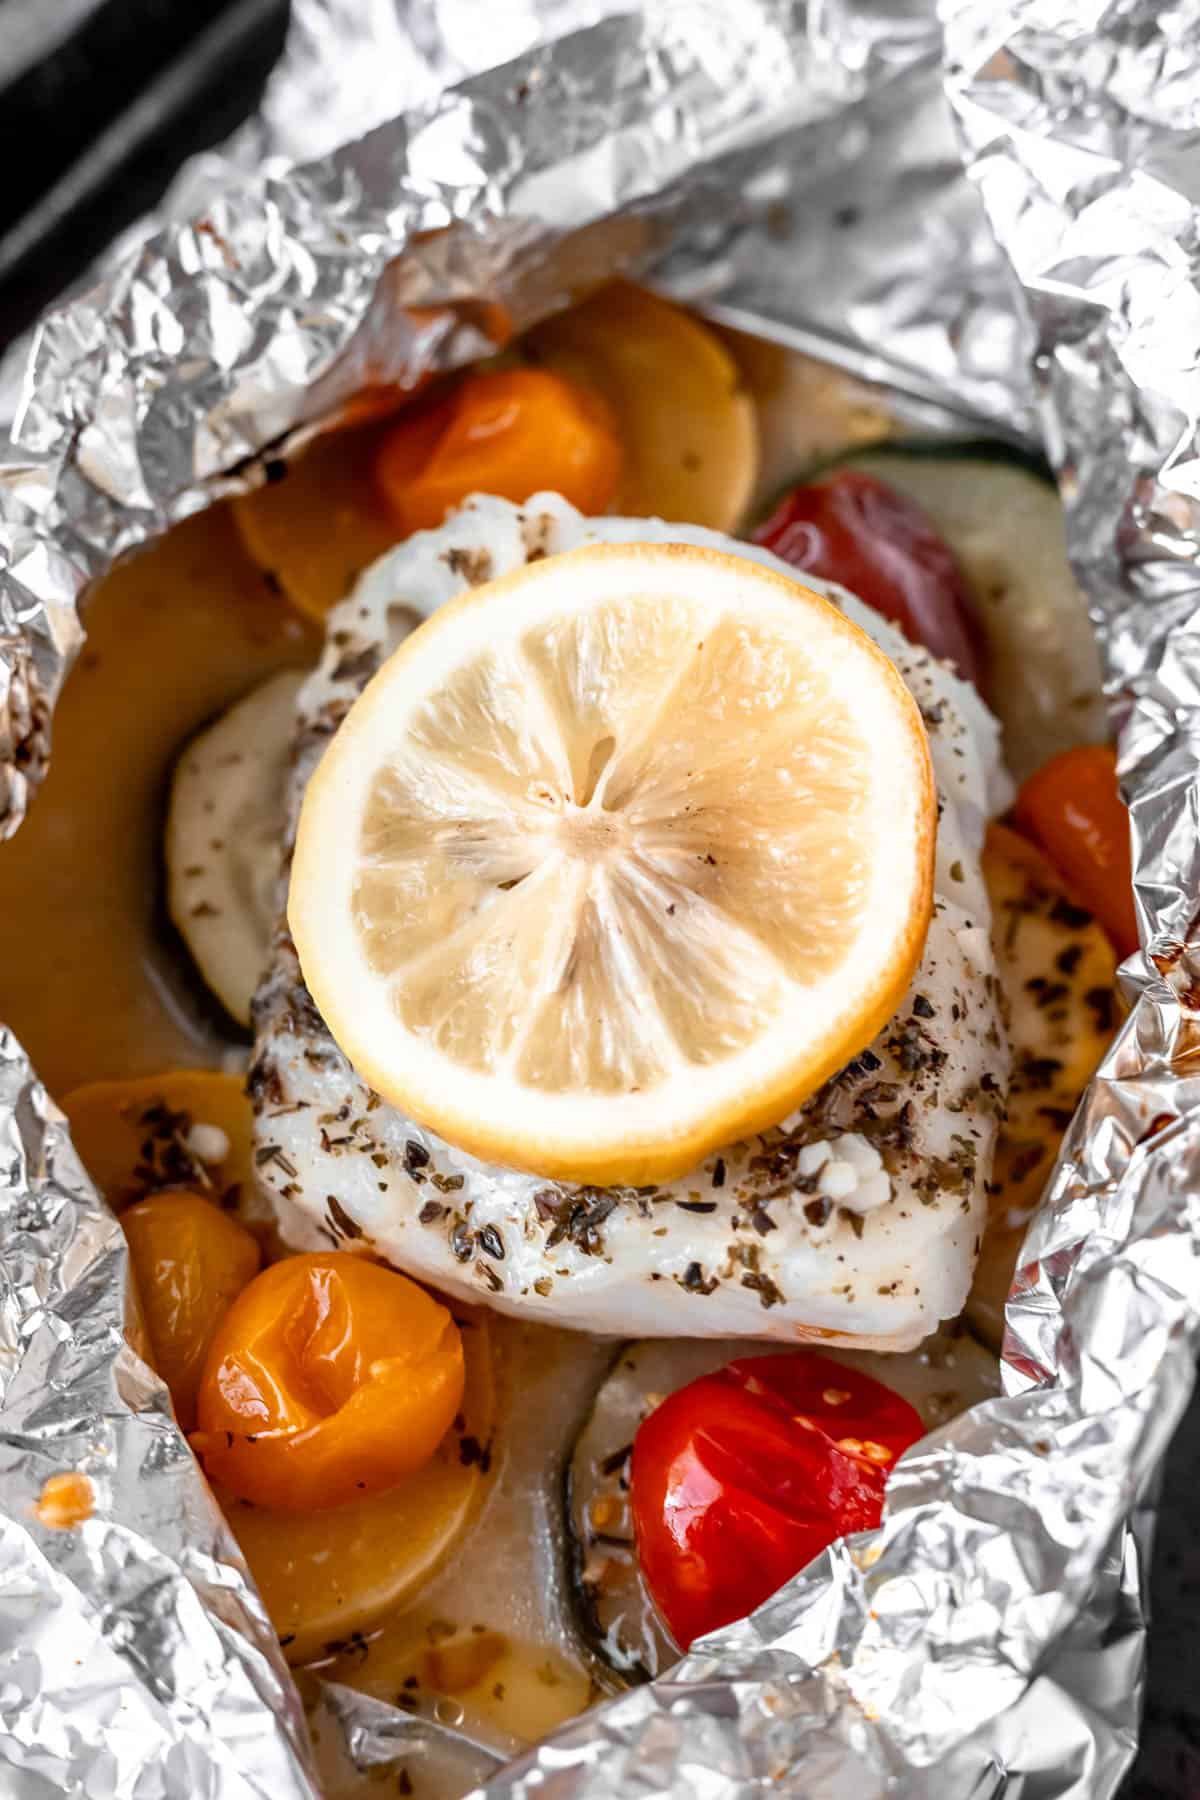 Baked cod in foil with vegetables and topped with lemon.